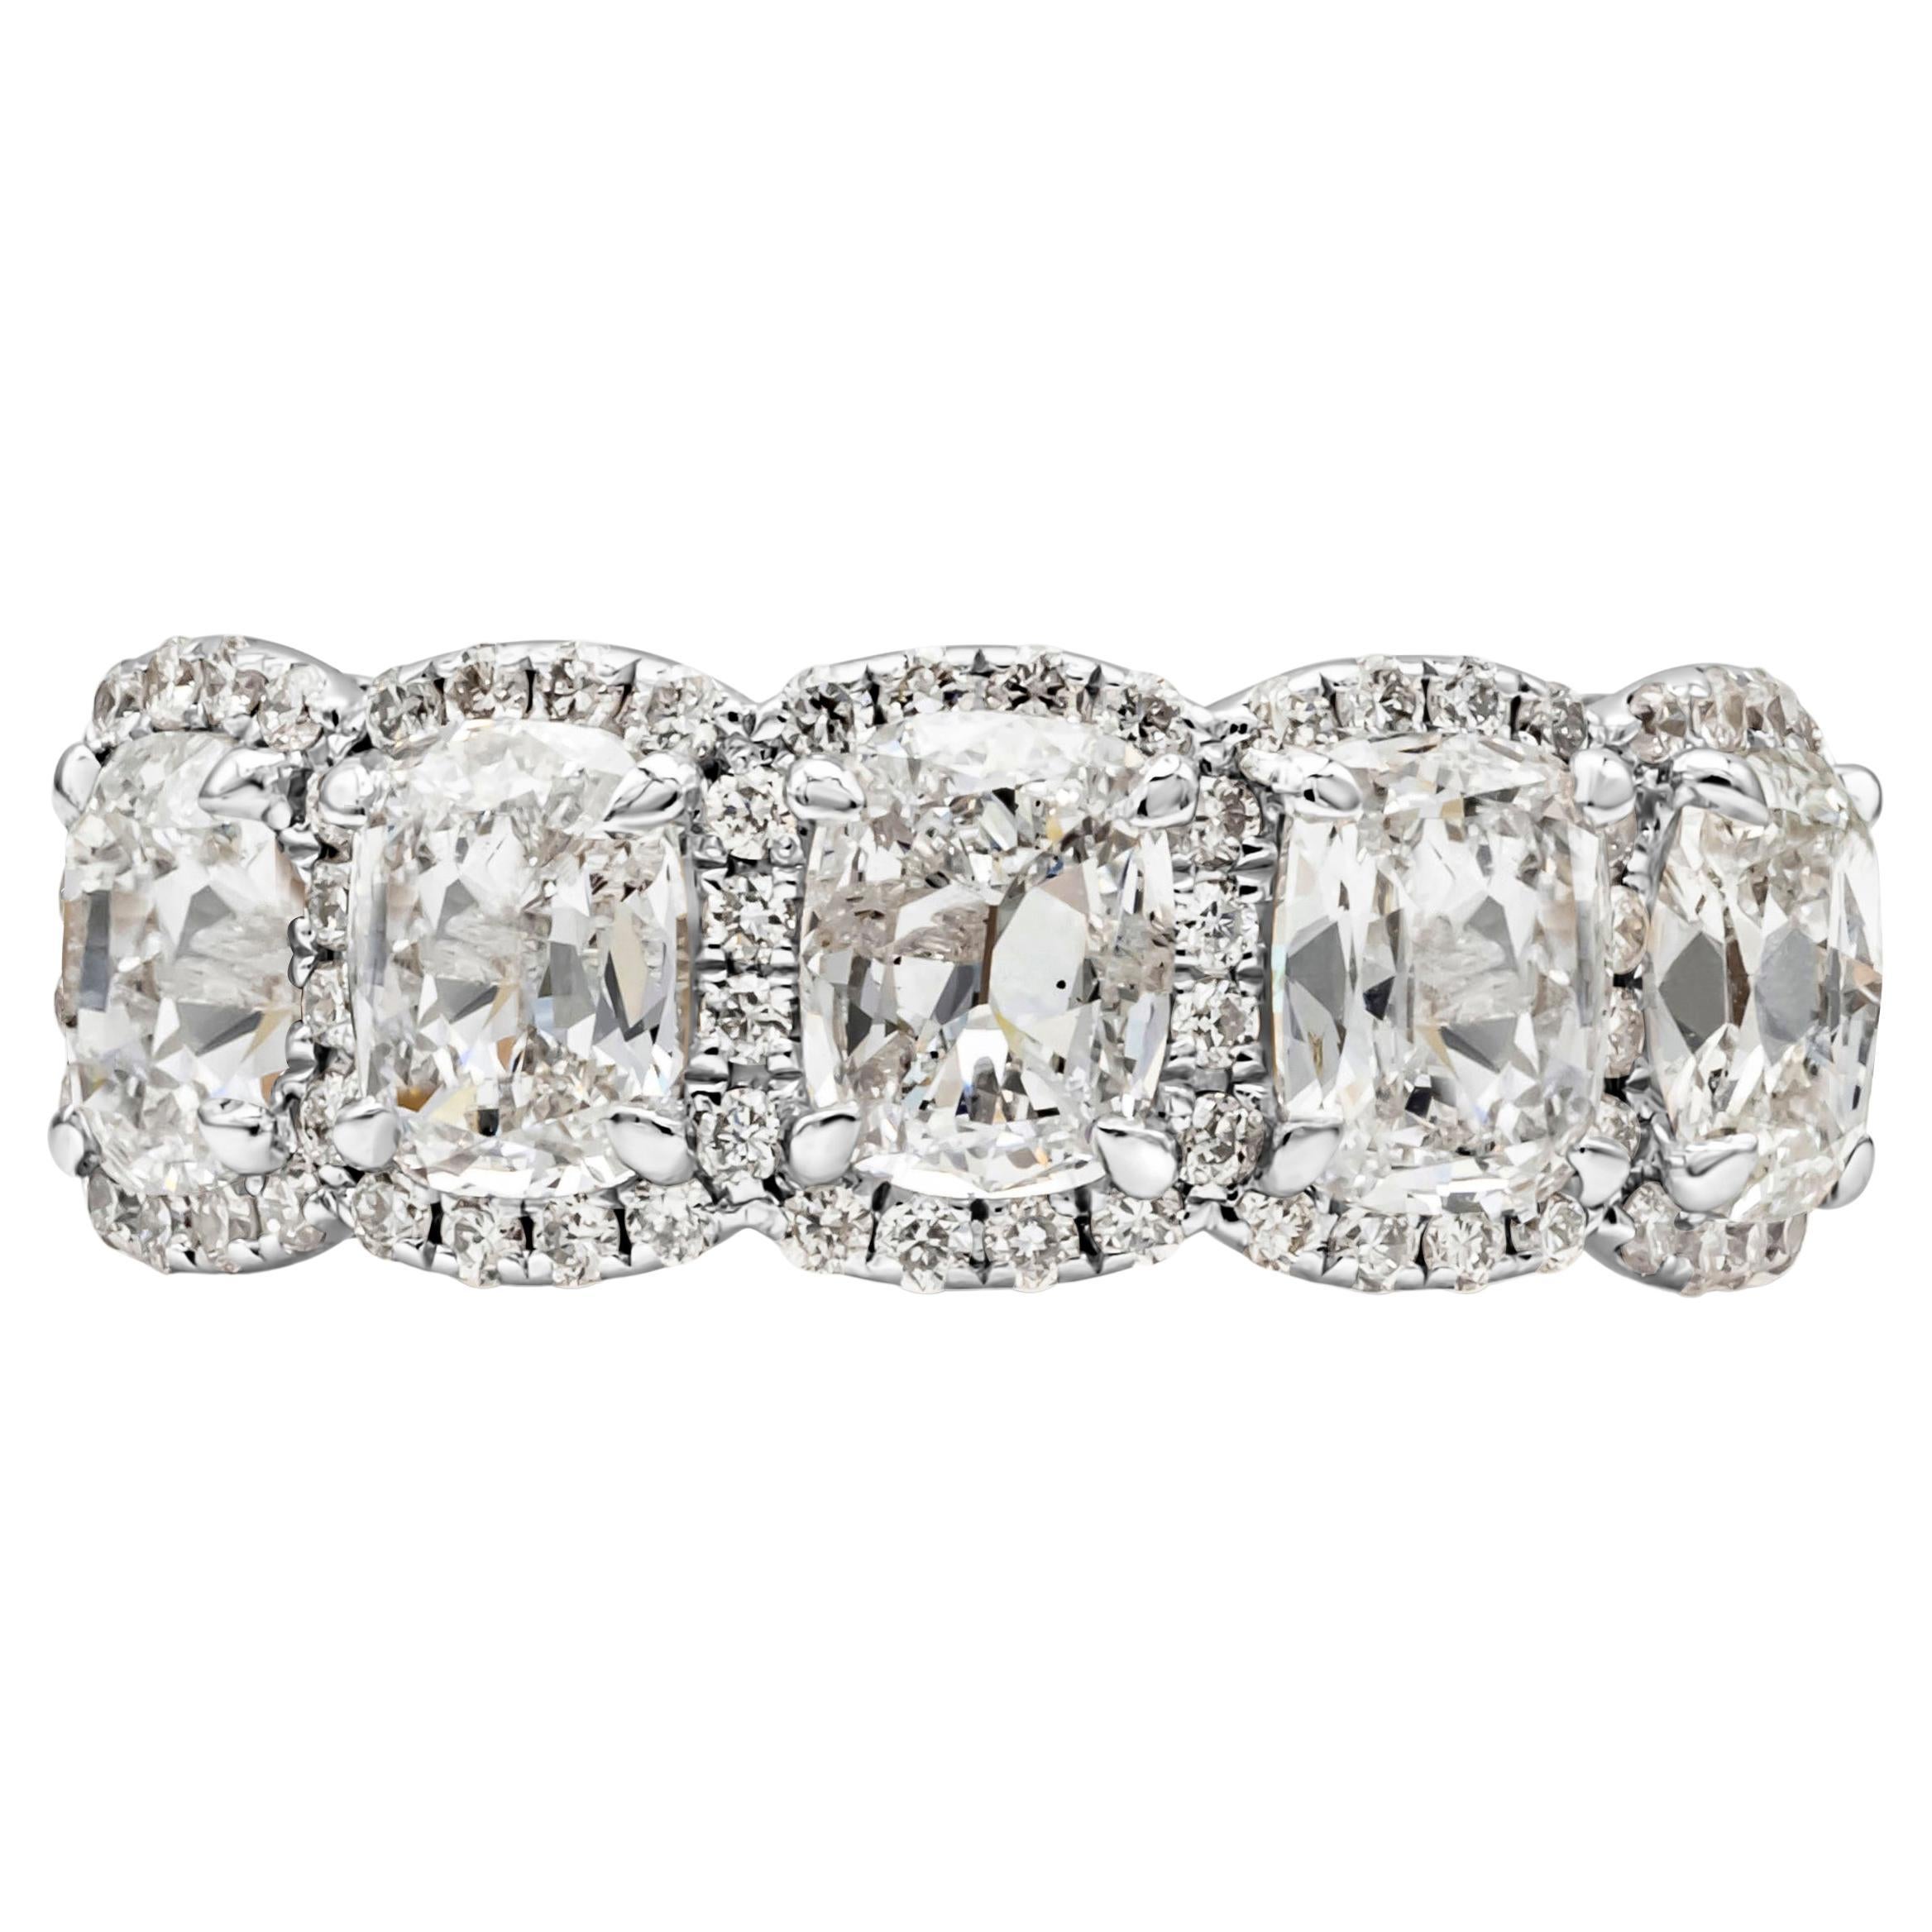 An elegant and stunning wedding band showcasing five cushion cut diamonds weighing 2.31 carats total, E color and S12-I1 in clarity, set in a classic 18k white gold four prong  basket setting. Each surrounded by a single row of round brilliant